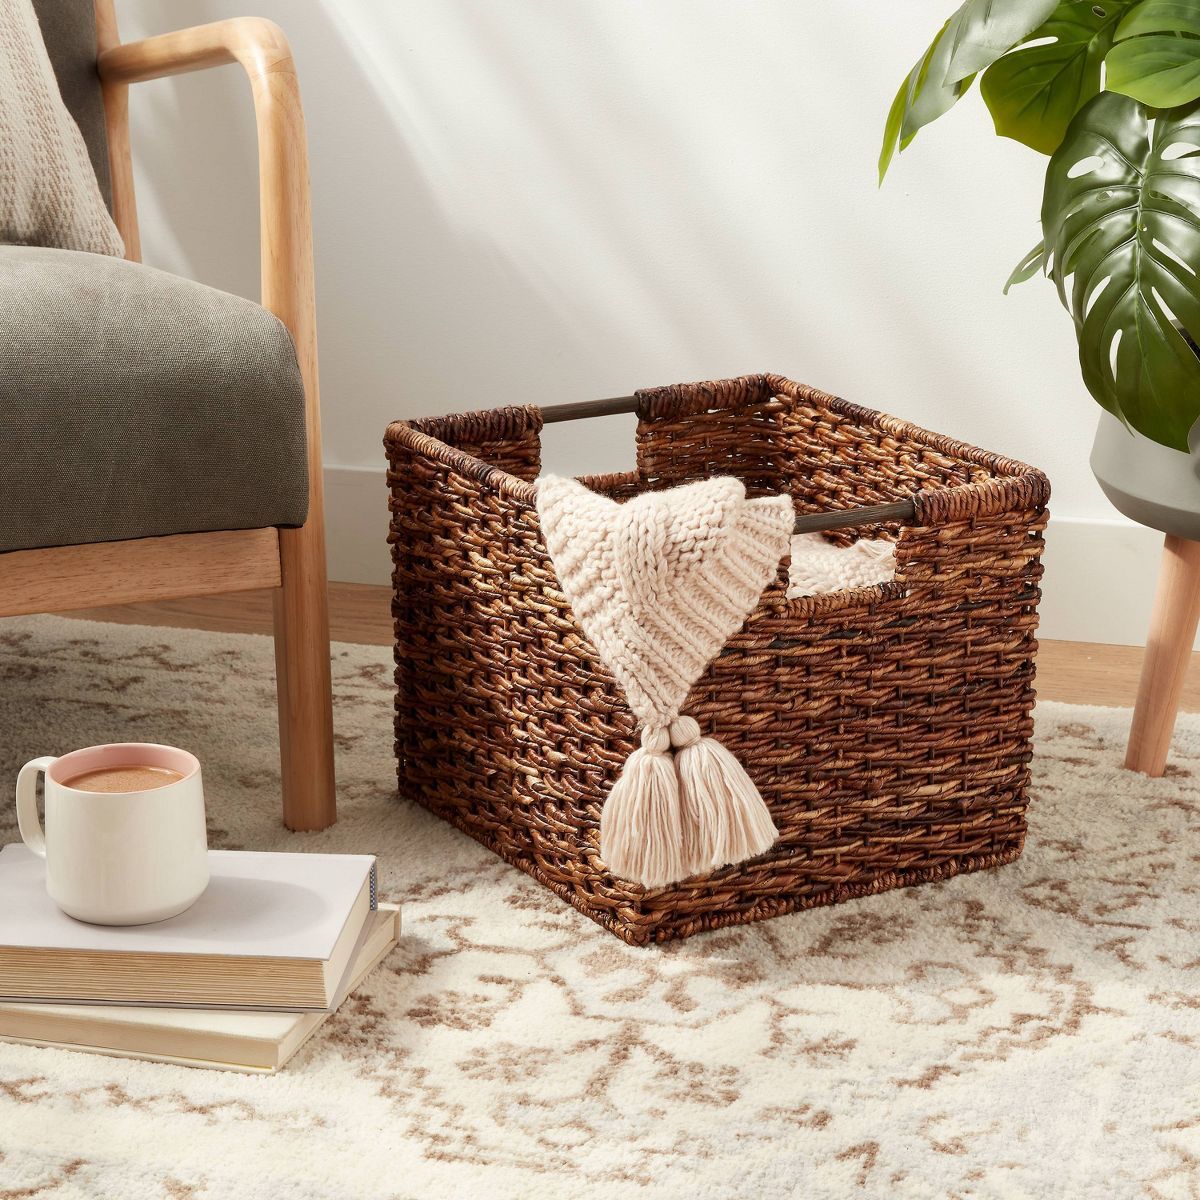 Woven Abaca Crate - Brightroom™ | Target